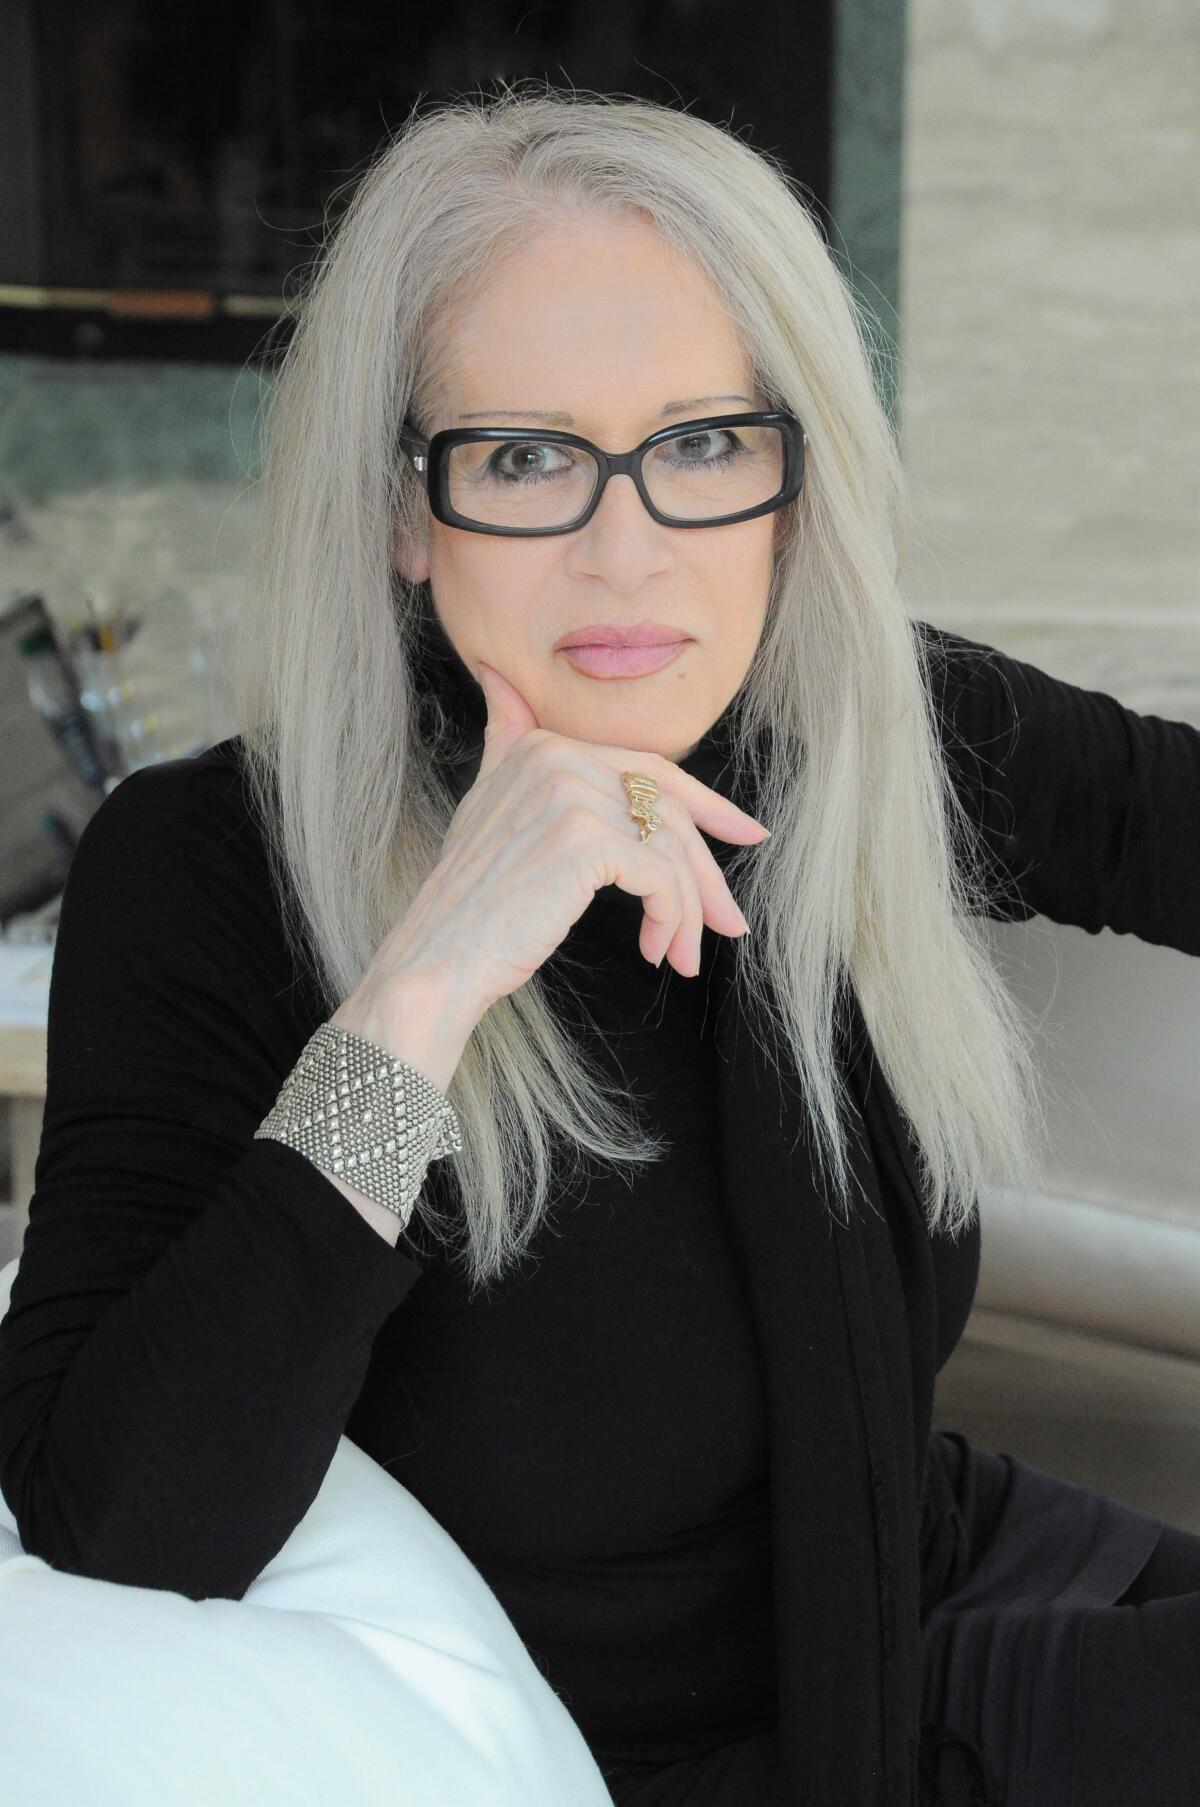 A woman with long white hair and dark-rimmed glasses